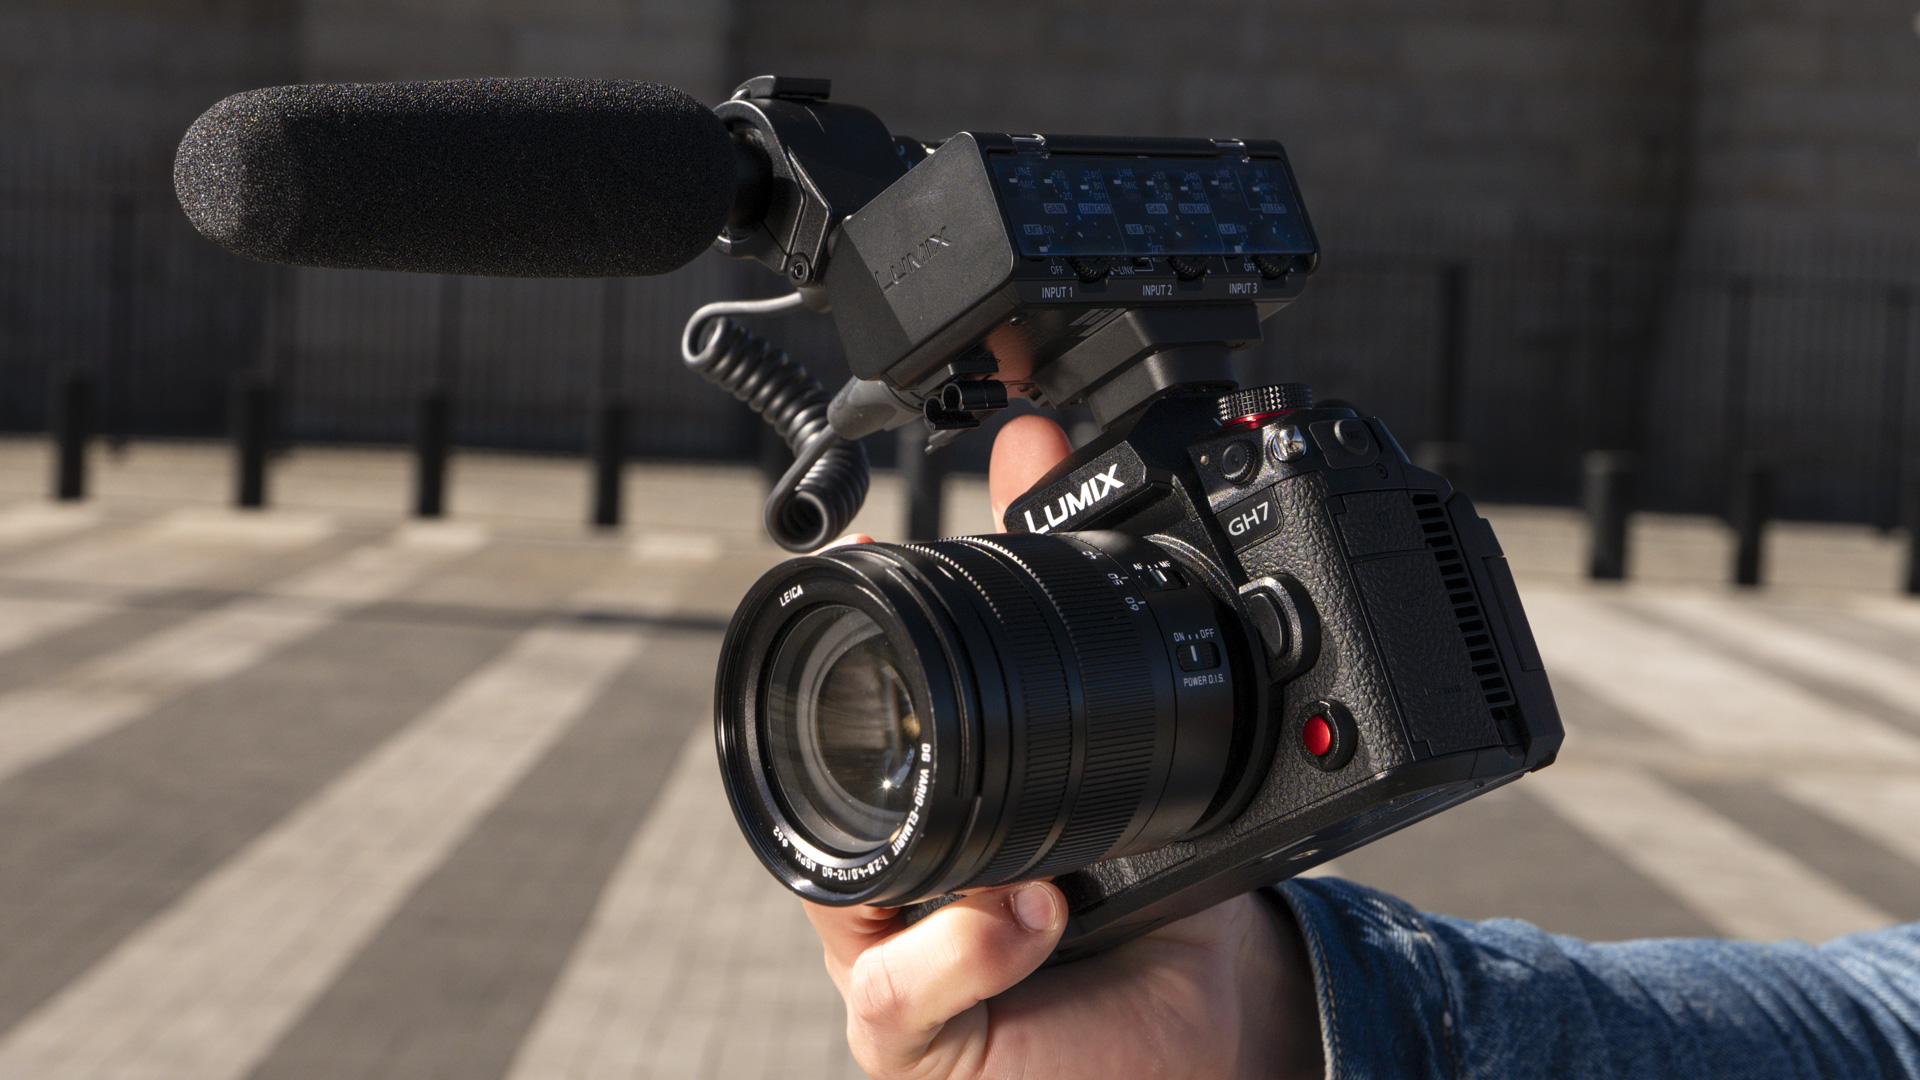 Panasonic Lumix GH7 camera in the hand with DMW-XLR2 mic adaptor attached